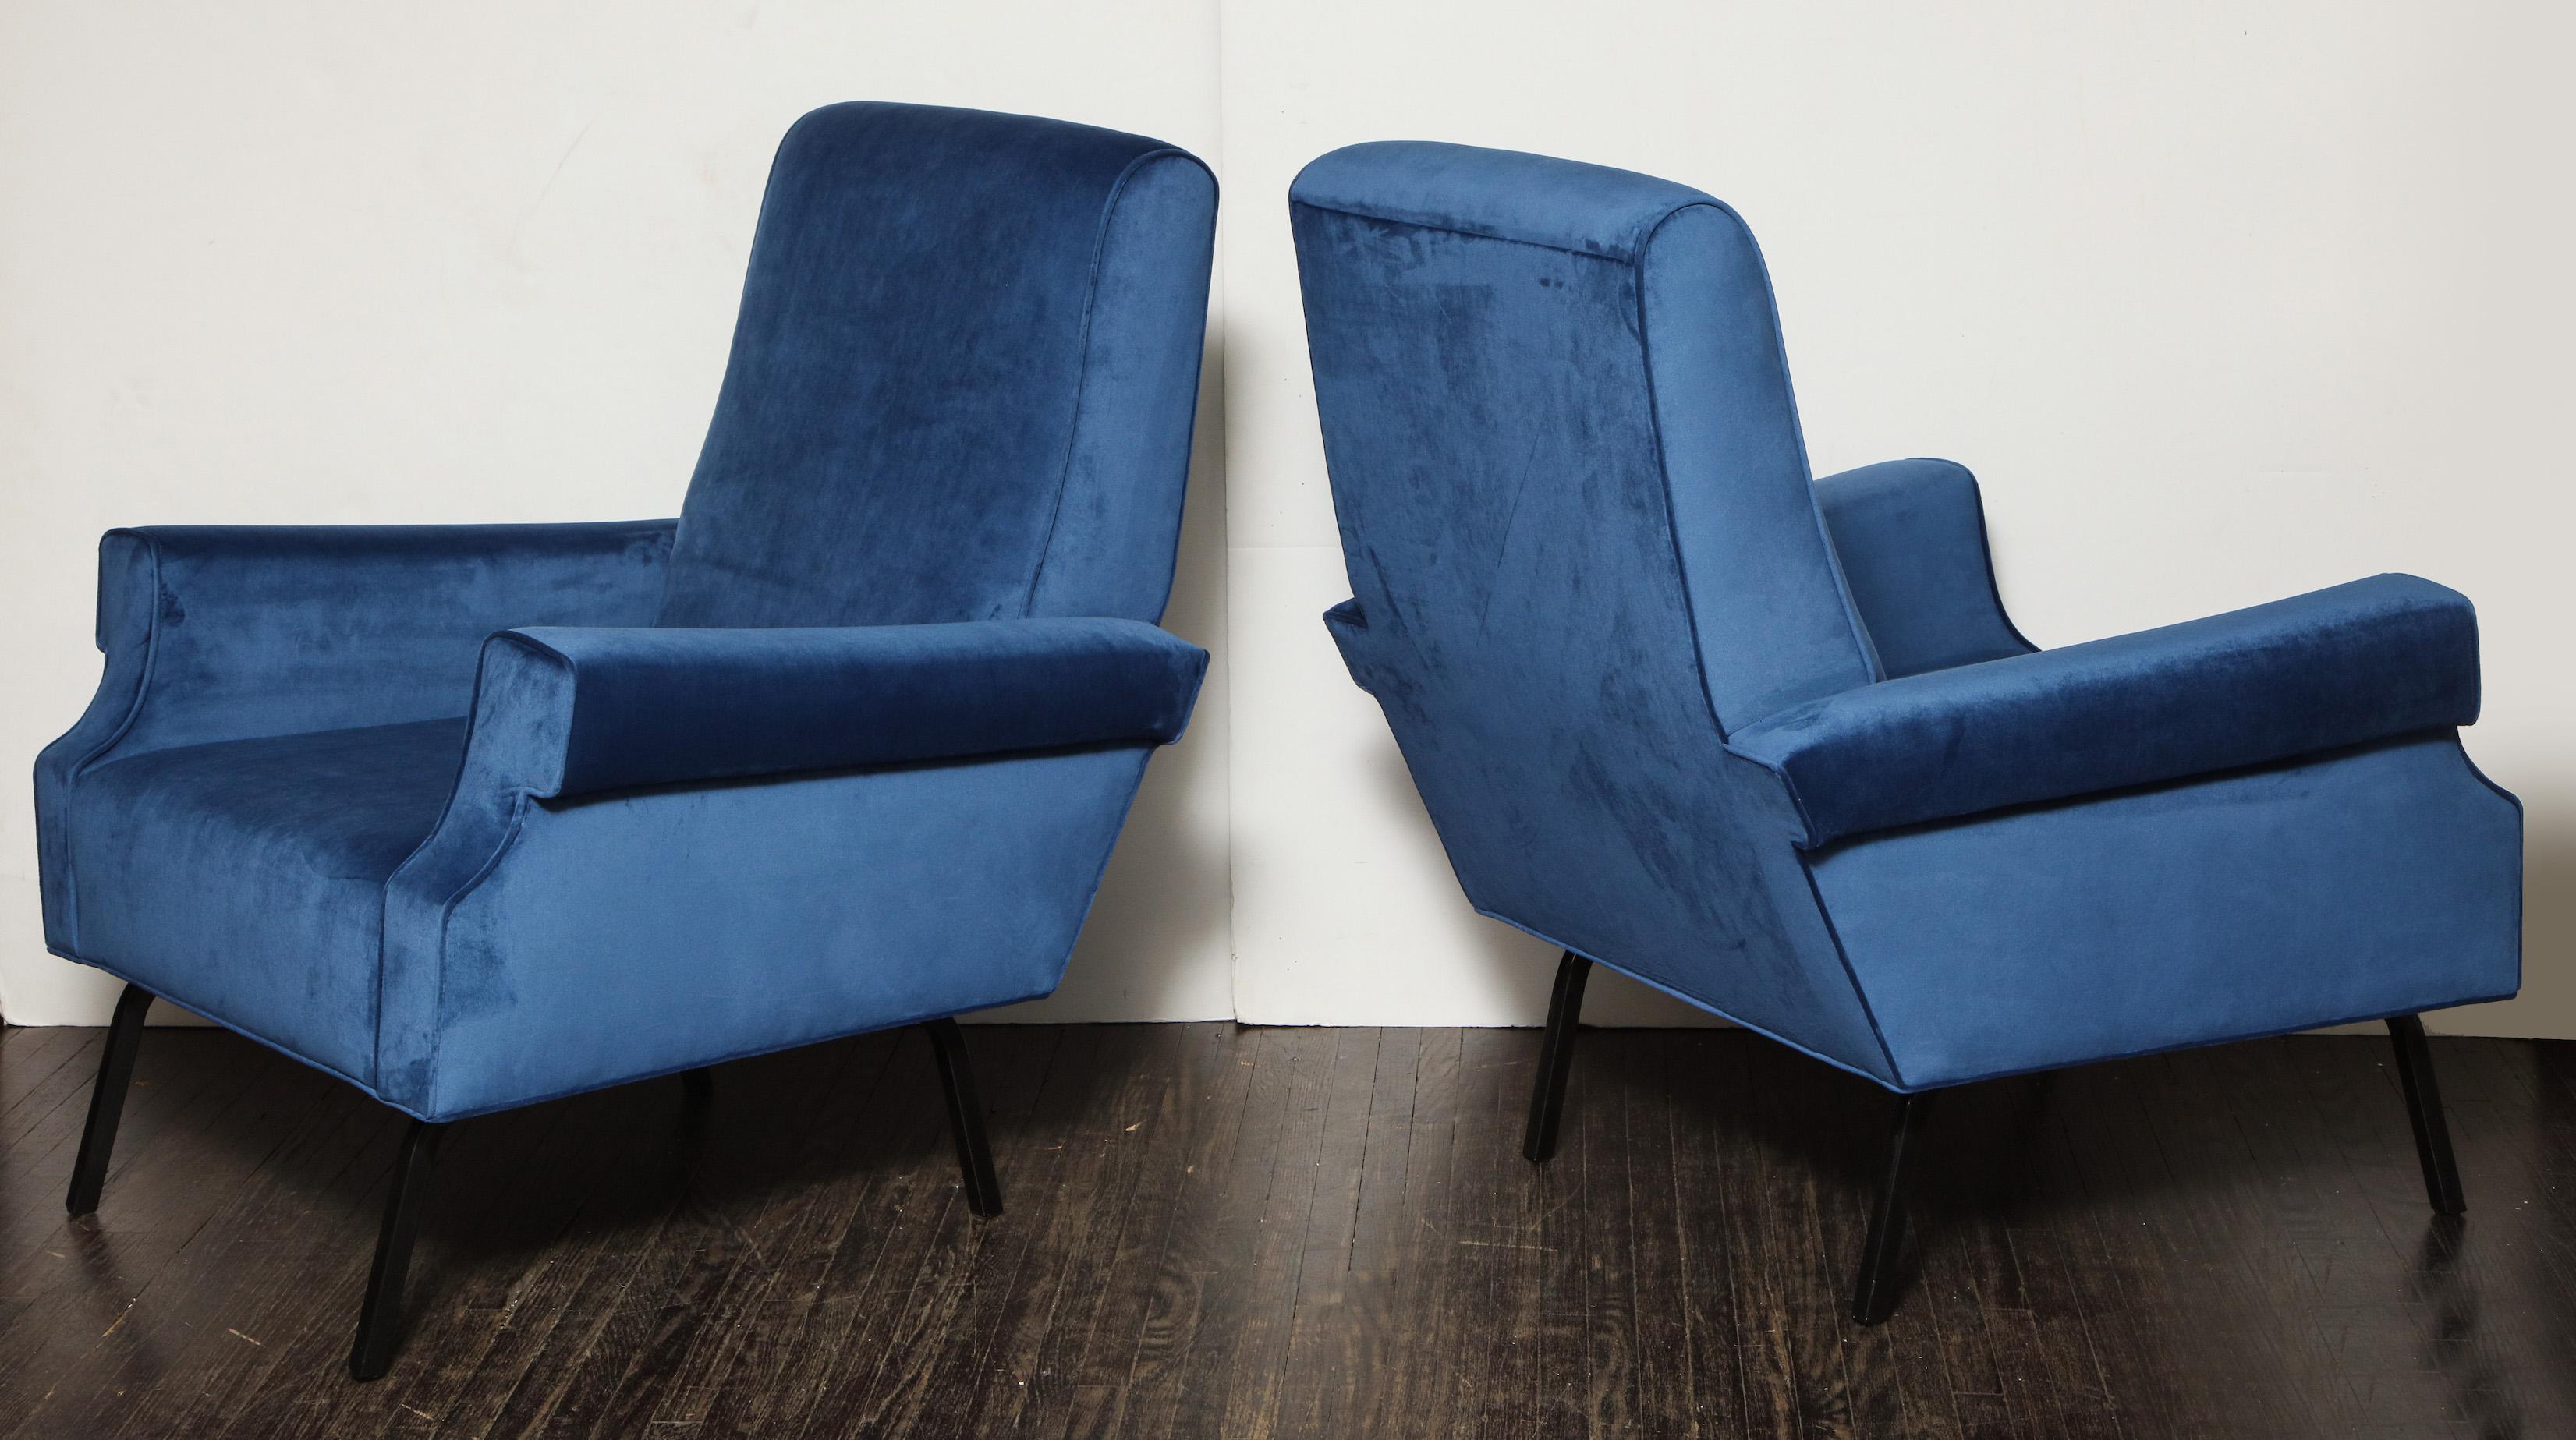 Pair of Mid-Century Modern blue velvet chairs with black iron legs. It was recently reupholstered in 2019.